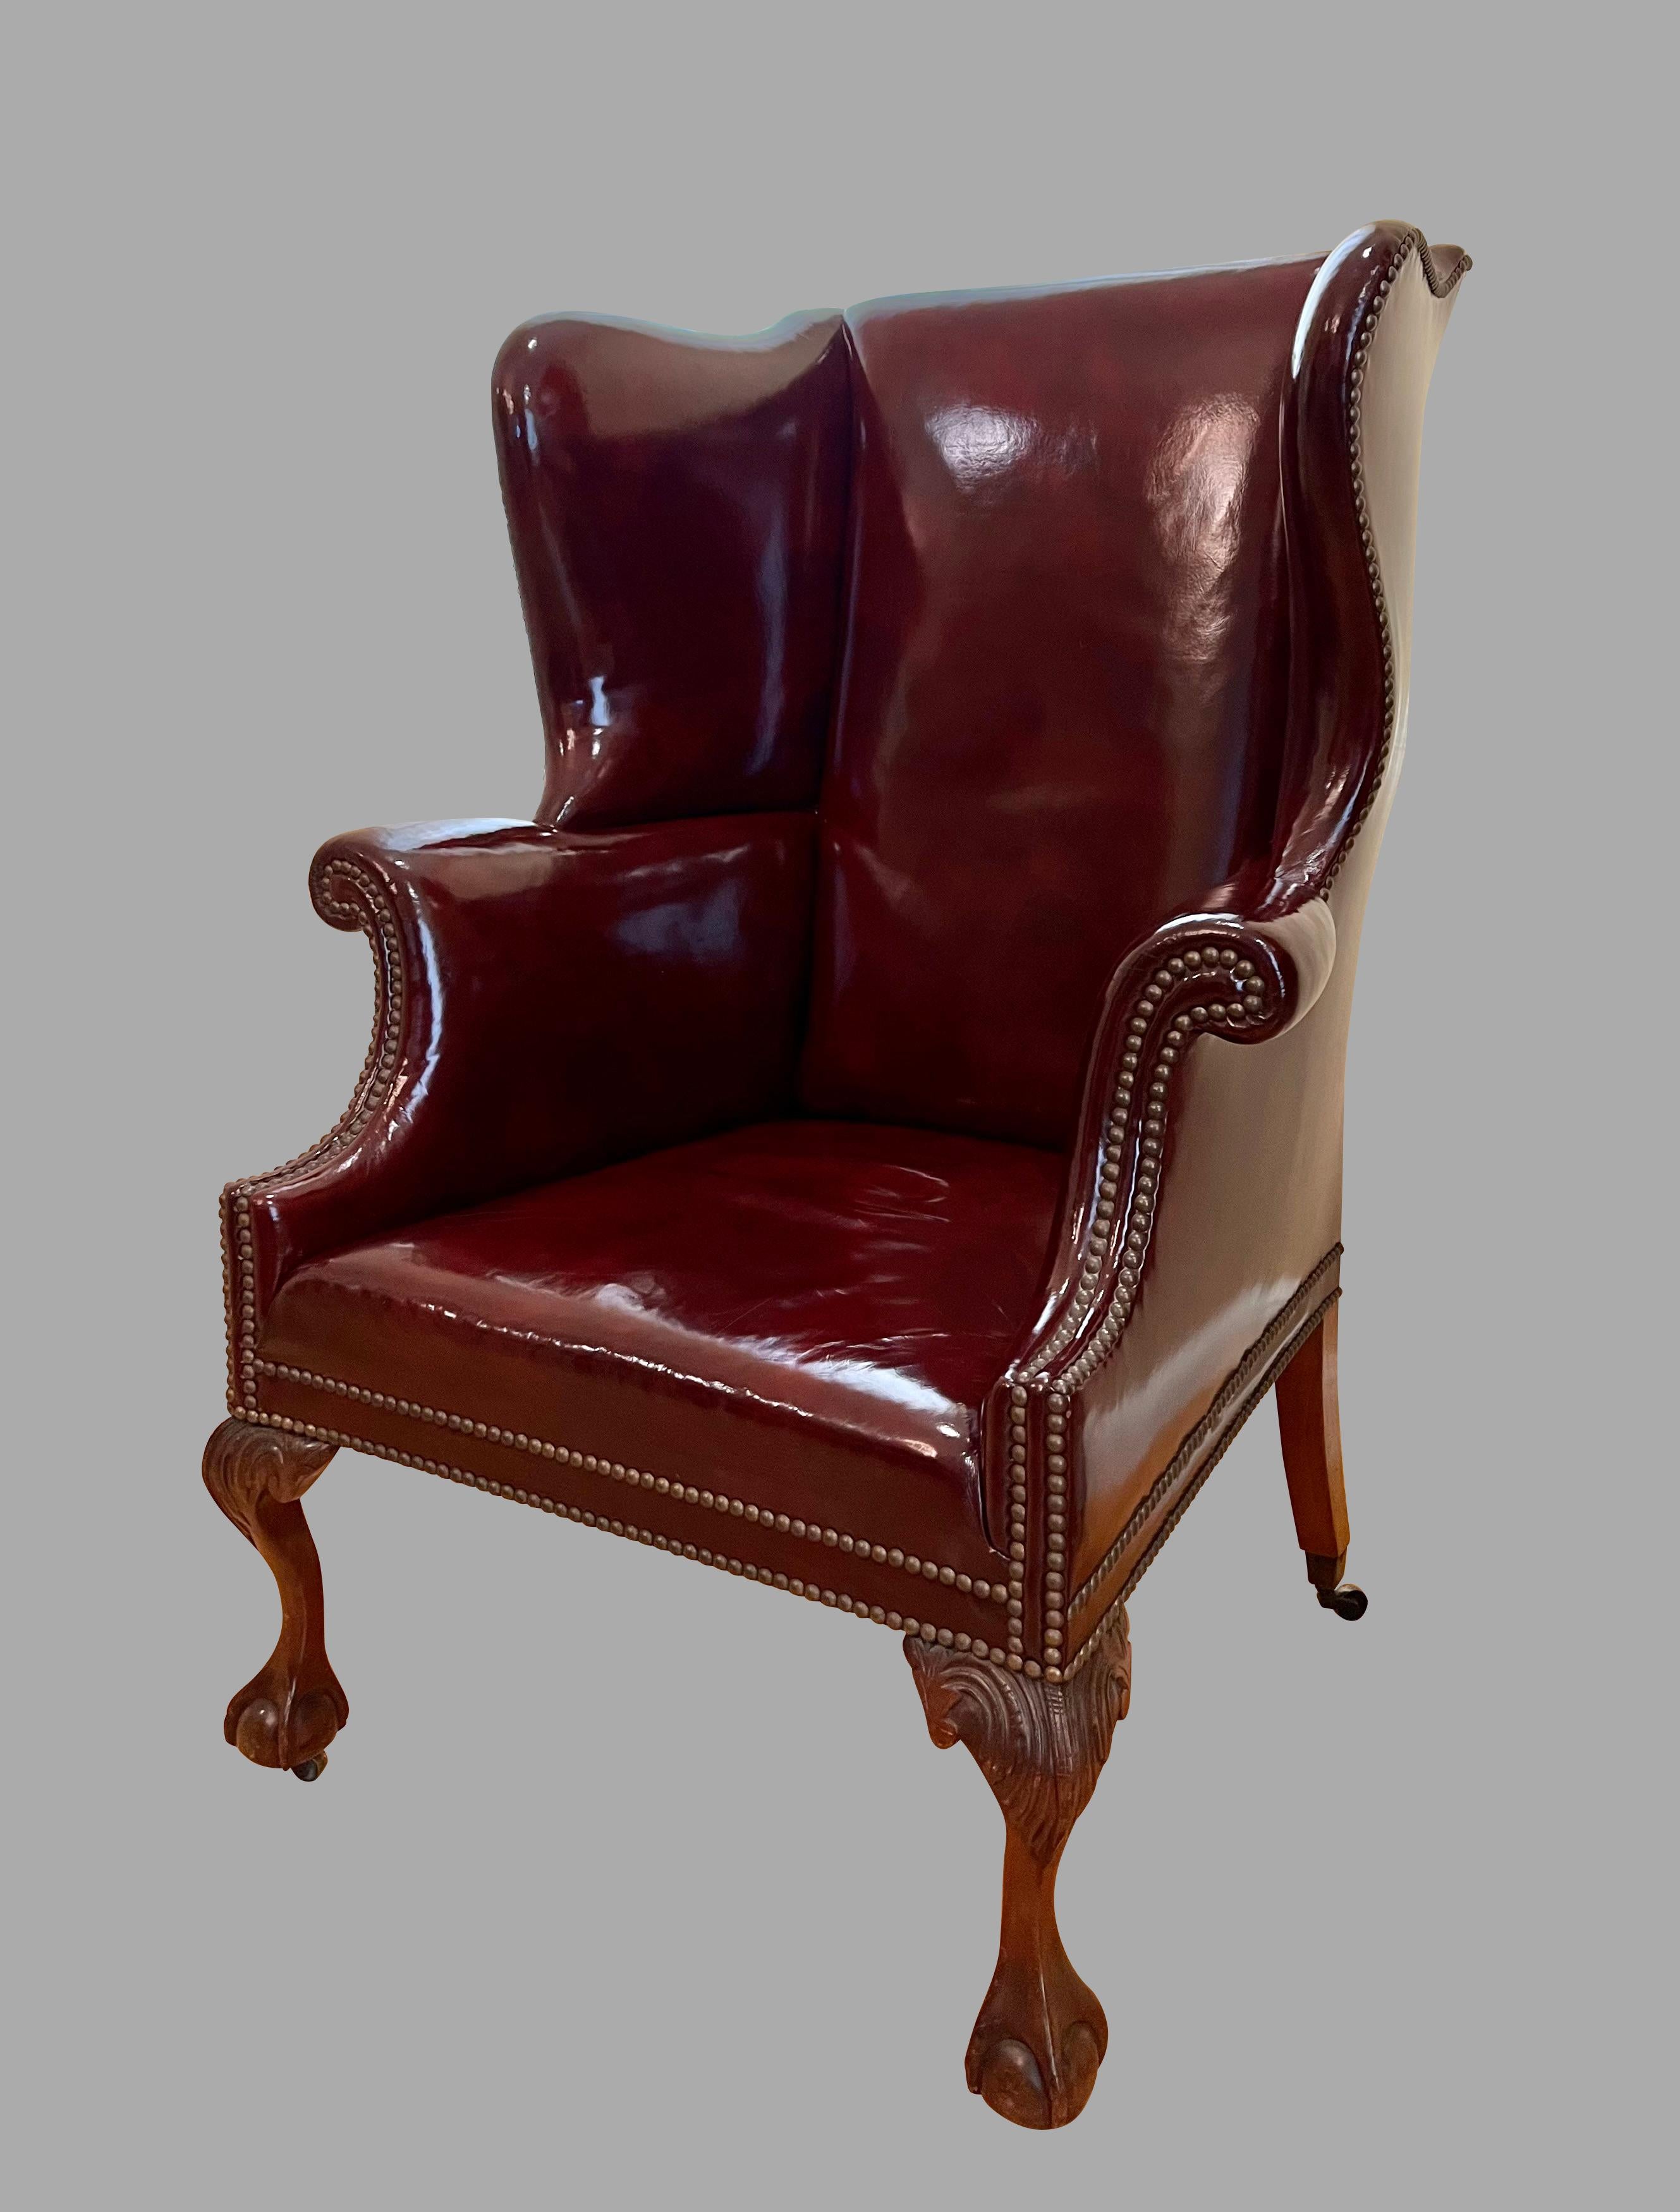 A good quality amply proportioned English Georgian style wing armchair of typical form, well-upholstered in polished claret colored hide finished with nailheads, supported on carved mahogany ball and claw feet ending in casters. Circa 1920.